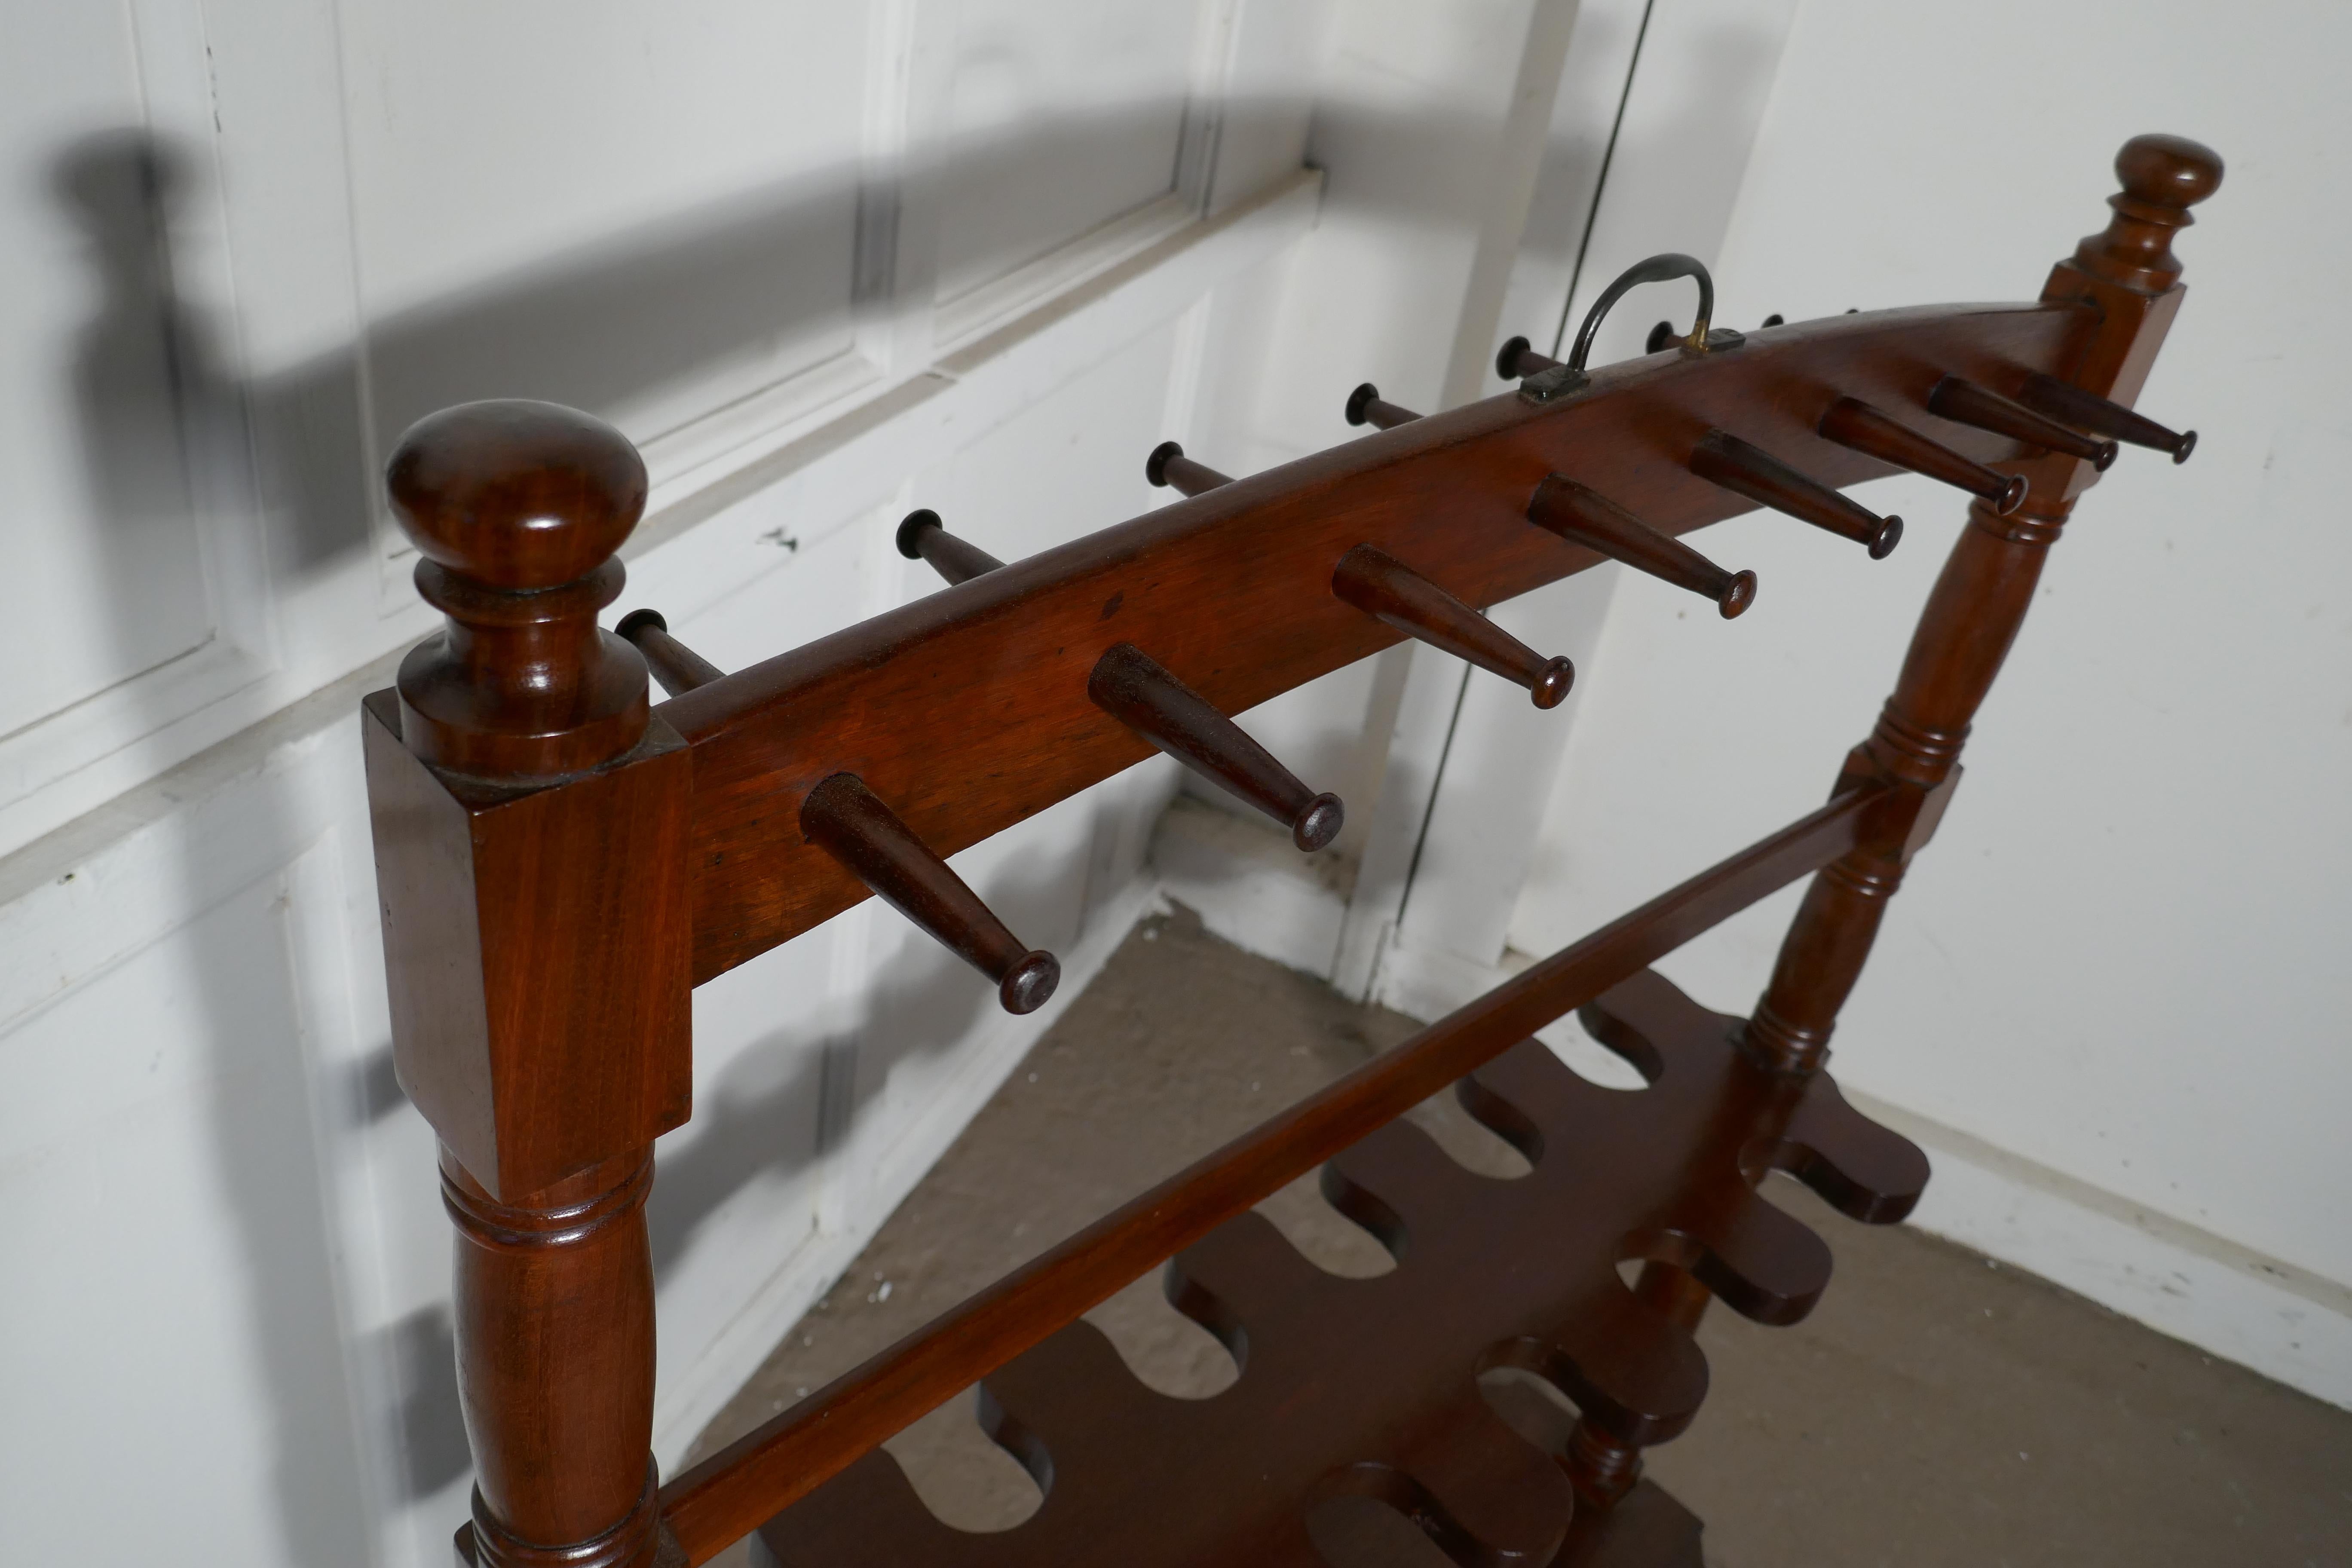 A double sided Georgian mahogany boot and whip rack. 

A double sided Georgian mahogany boot and whip rack this great piece is in very good condition. This antique mahogany boot rack dates from circa 1800. Complete with turned decorative finials